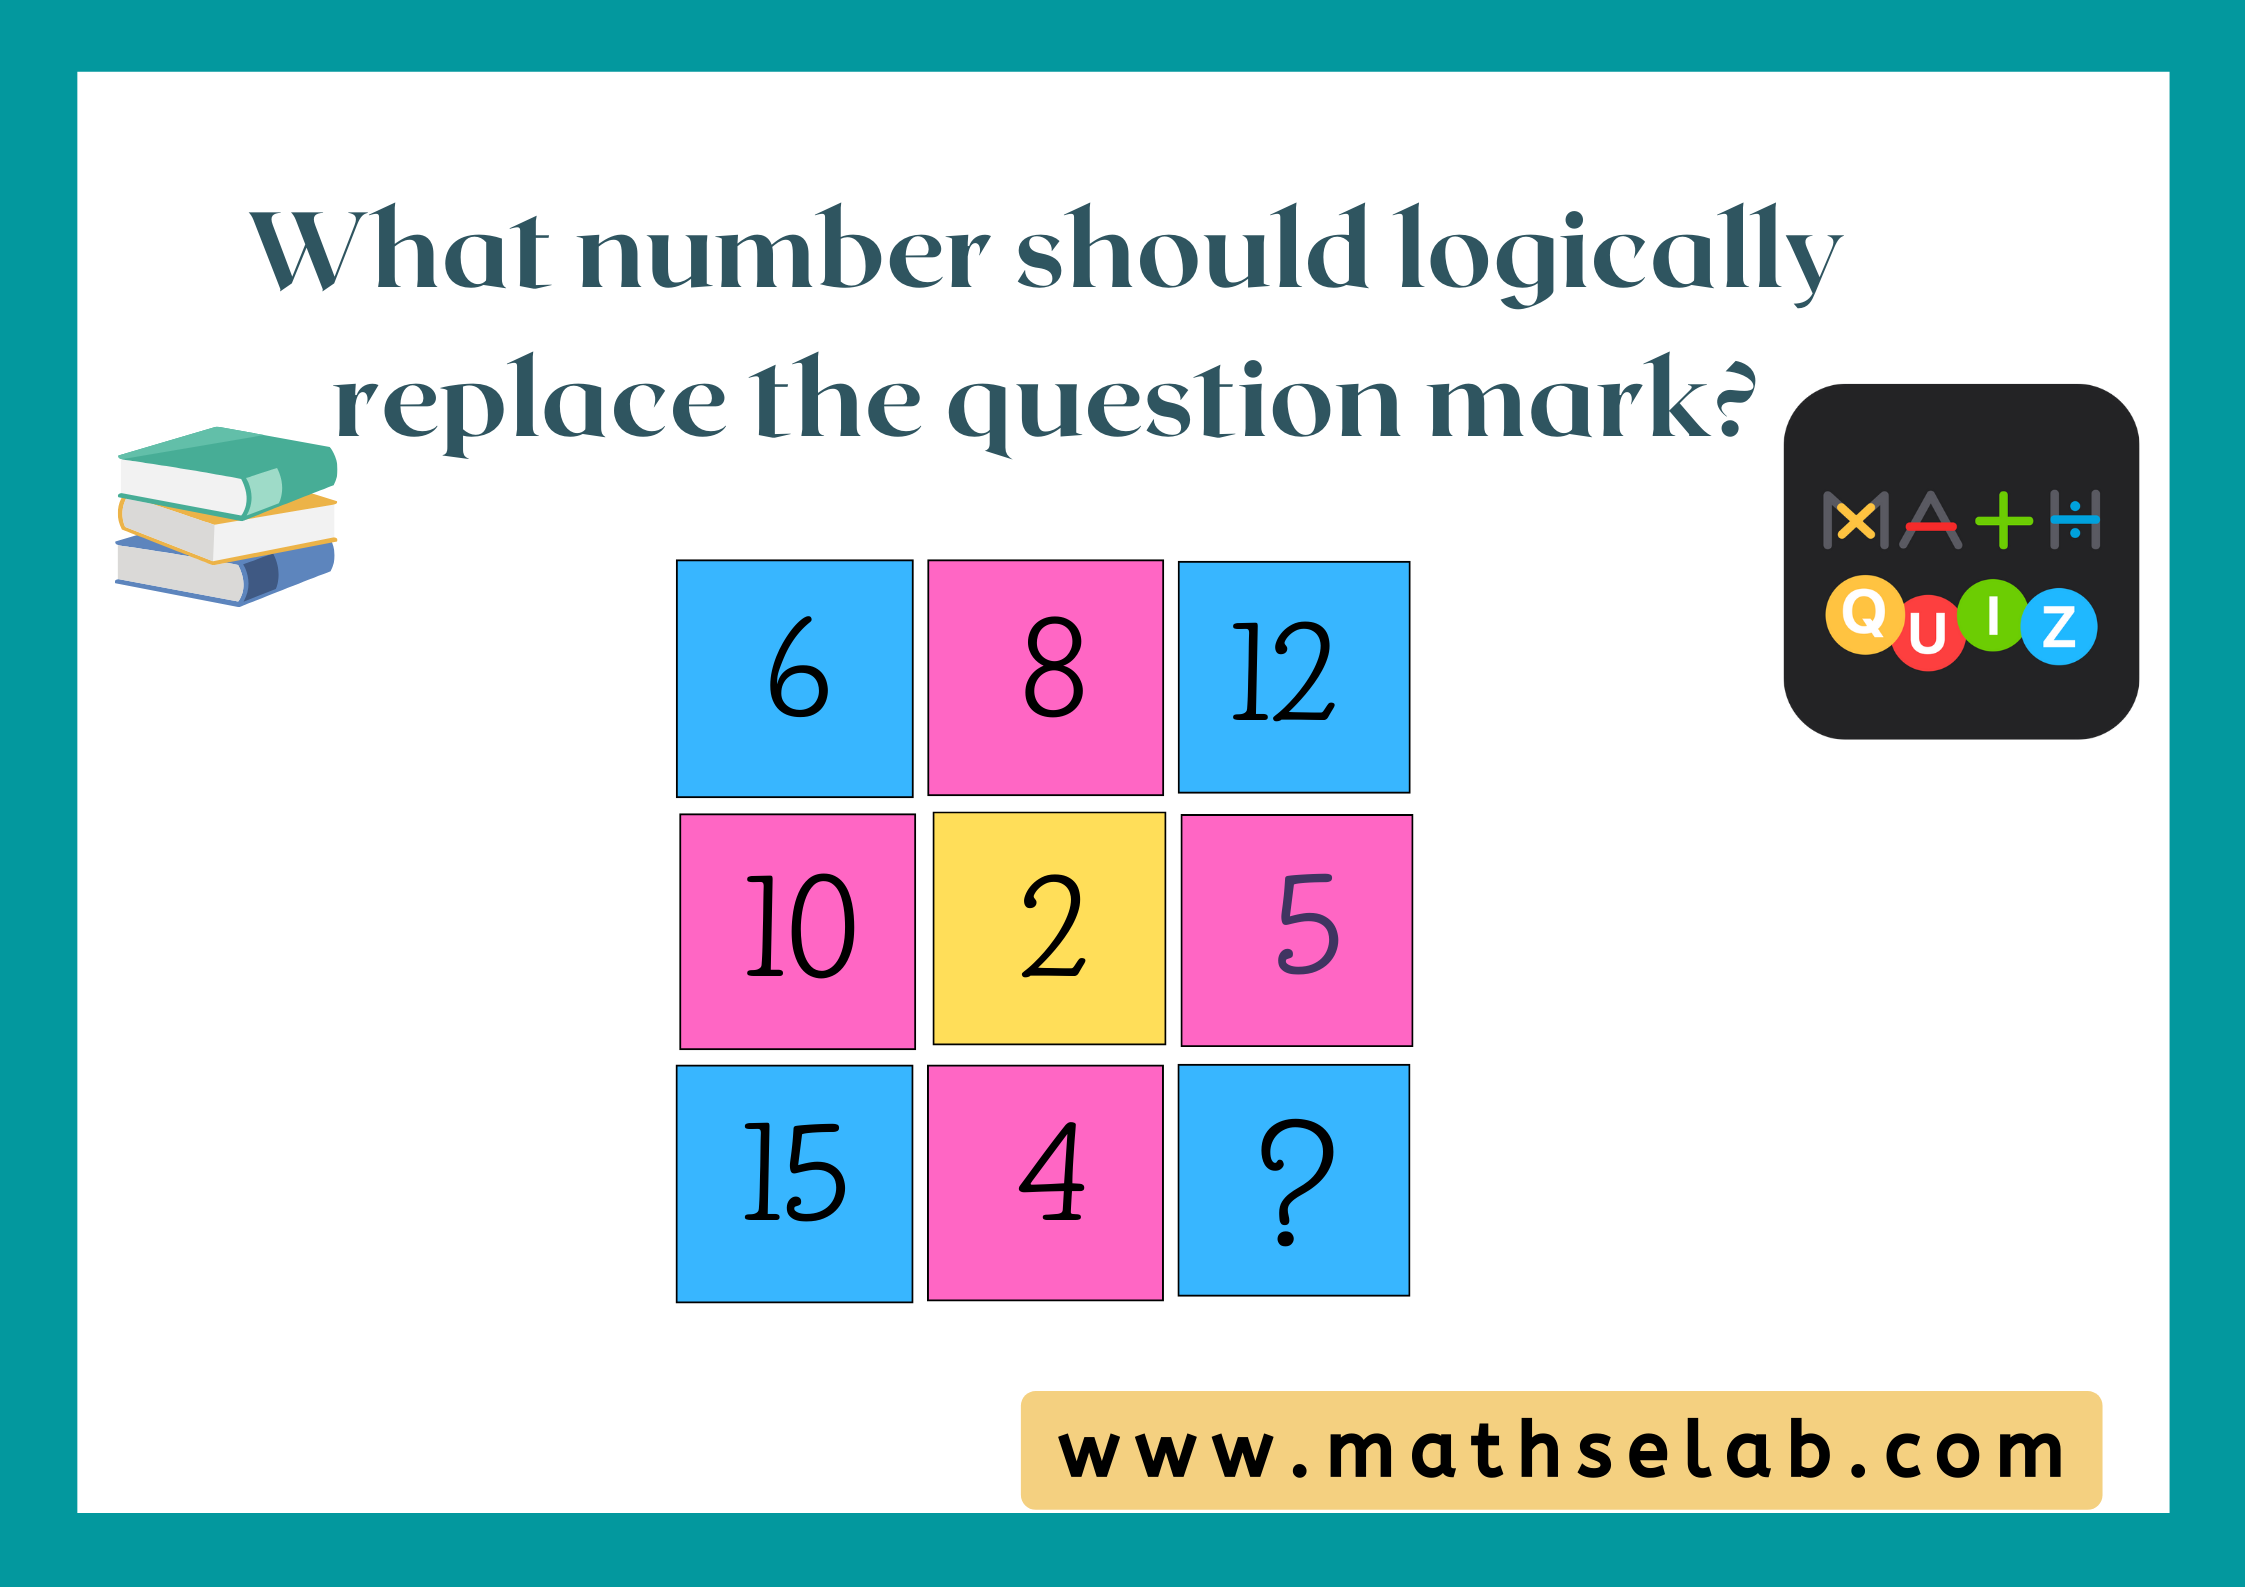 What-number-should-logically-replace-the-question-mark-mathselab.com_